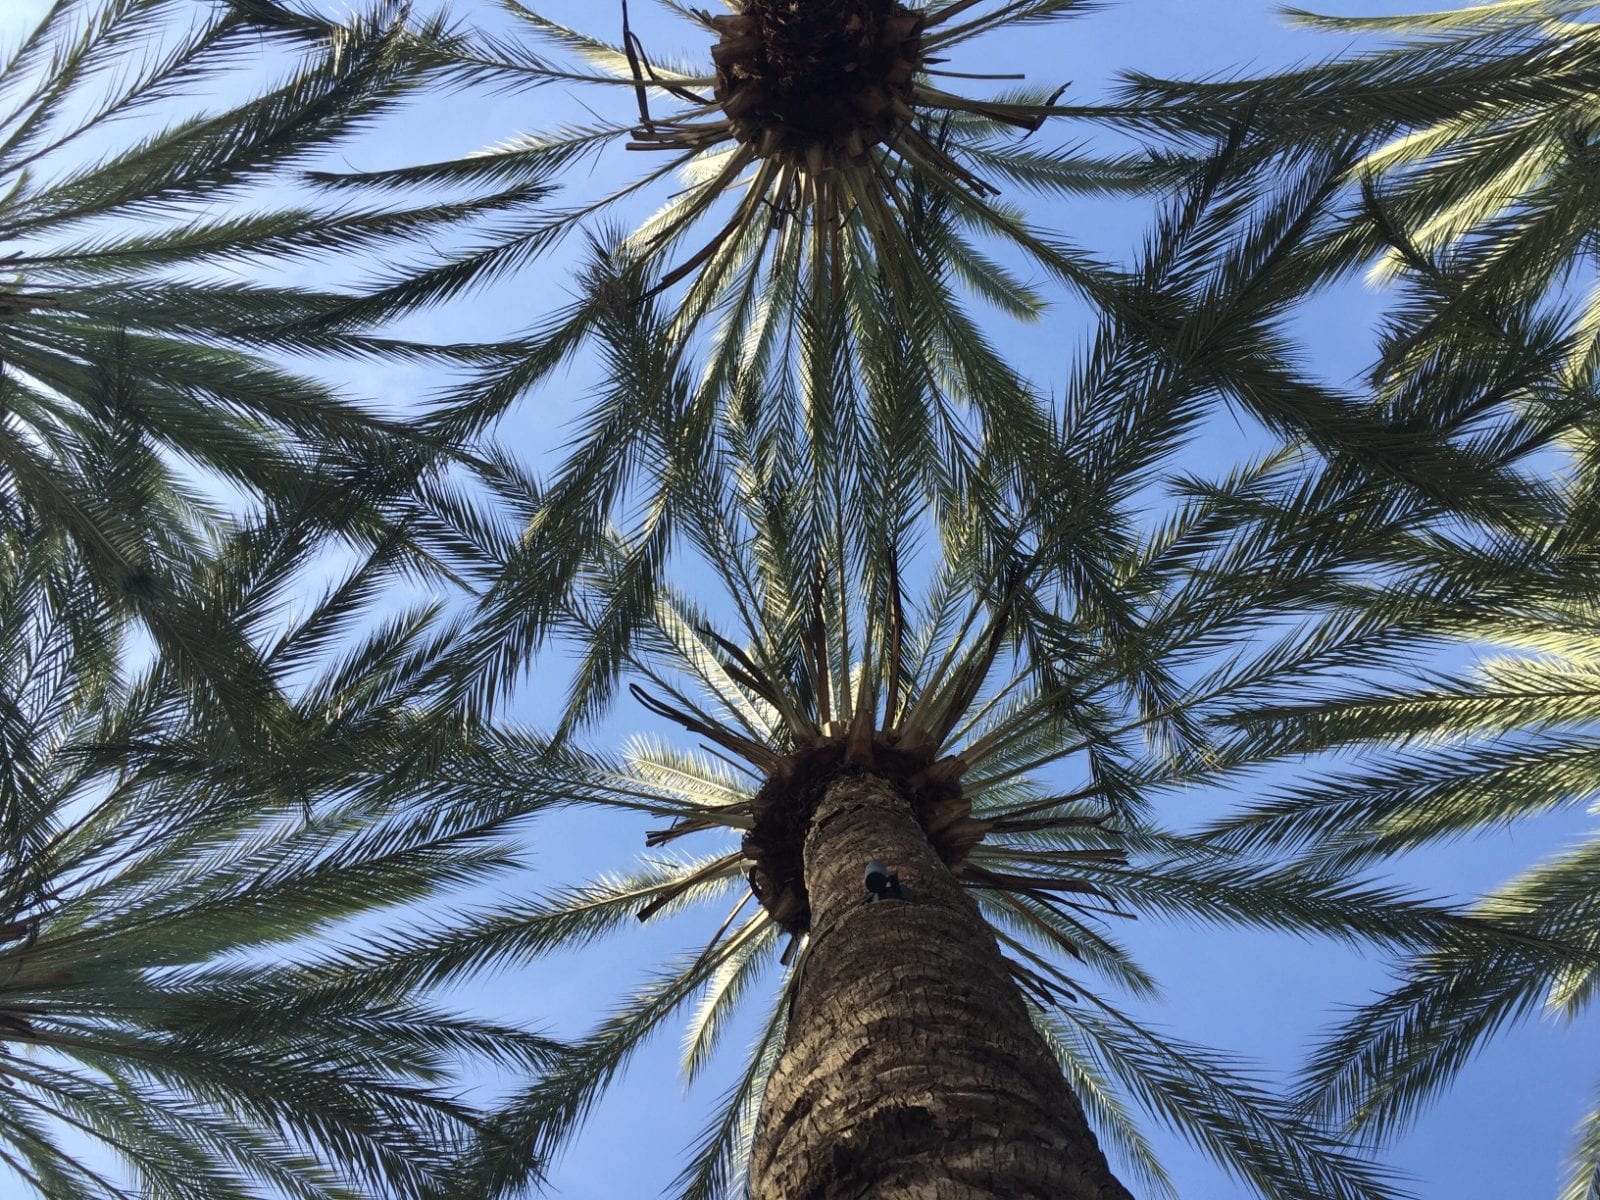 Palm trees in Anaheim, view from below